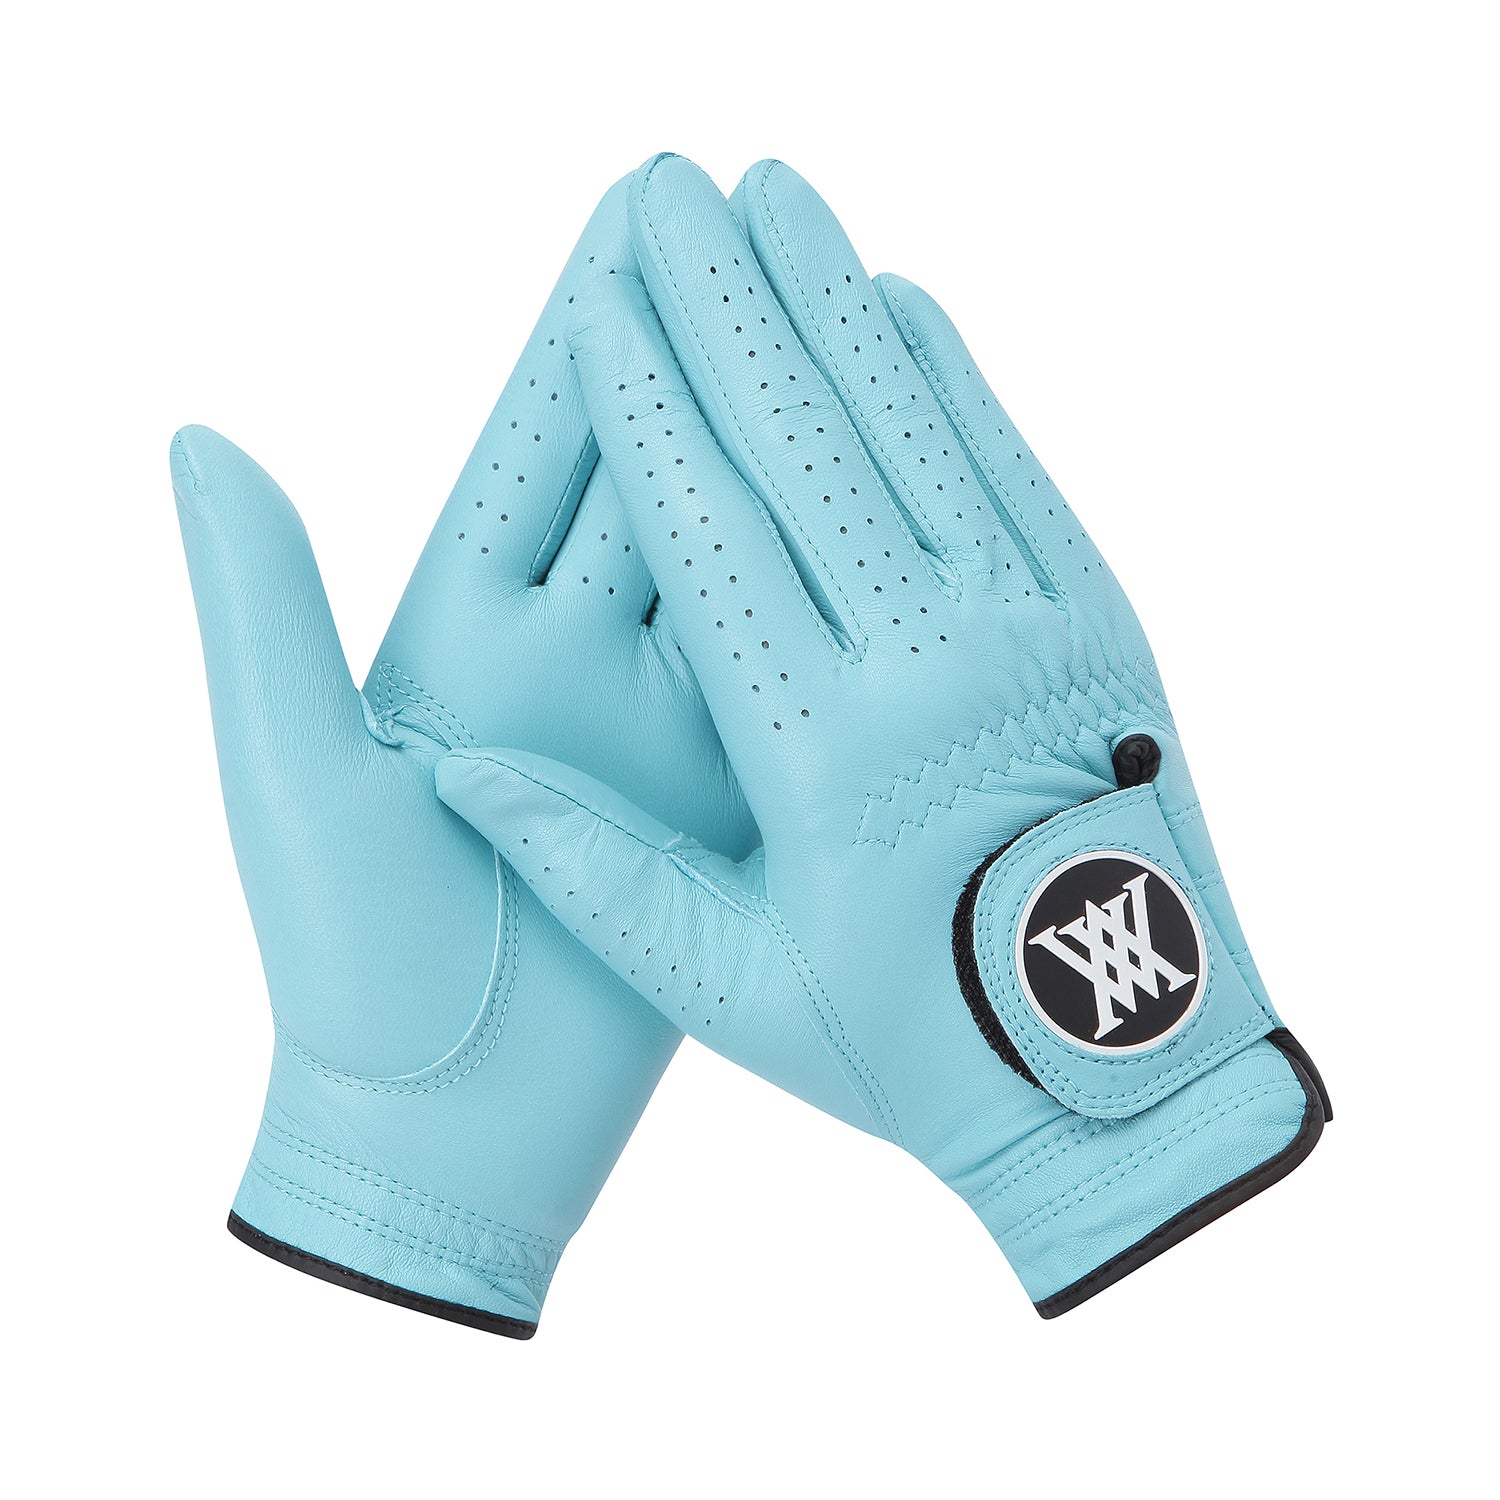 ANEW GOLF Women's Two Hand Solid Gloves